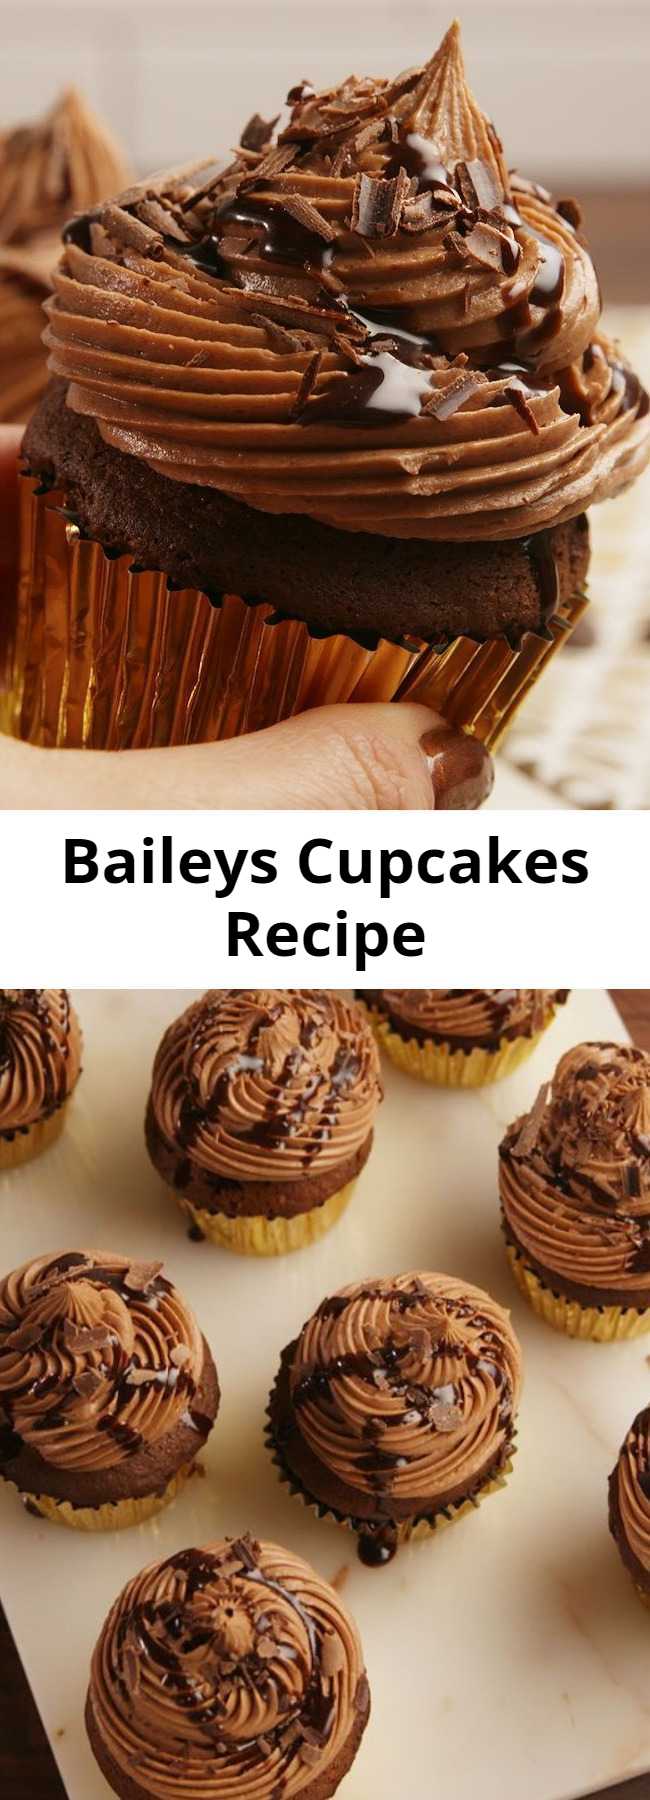 Baileys Cupcakes Recipe - These cupcakes are perfect for Baileys lovers. All cupcakes should be boozy.